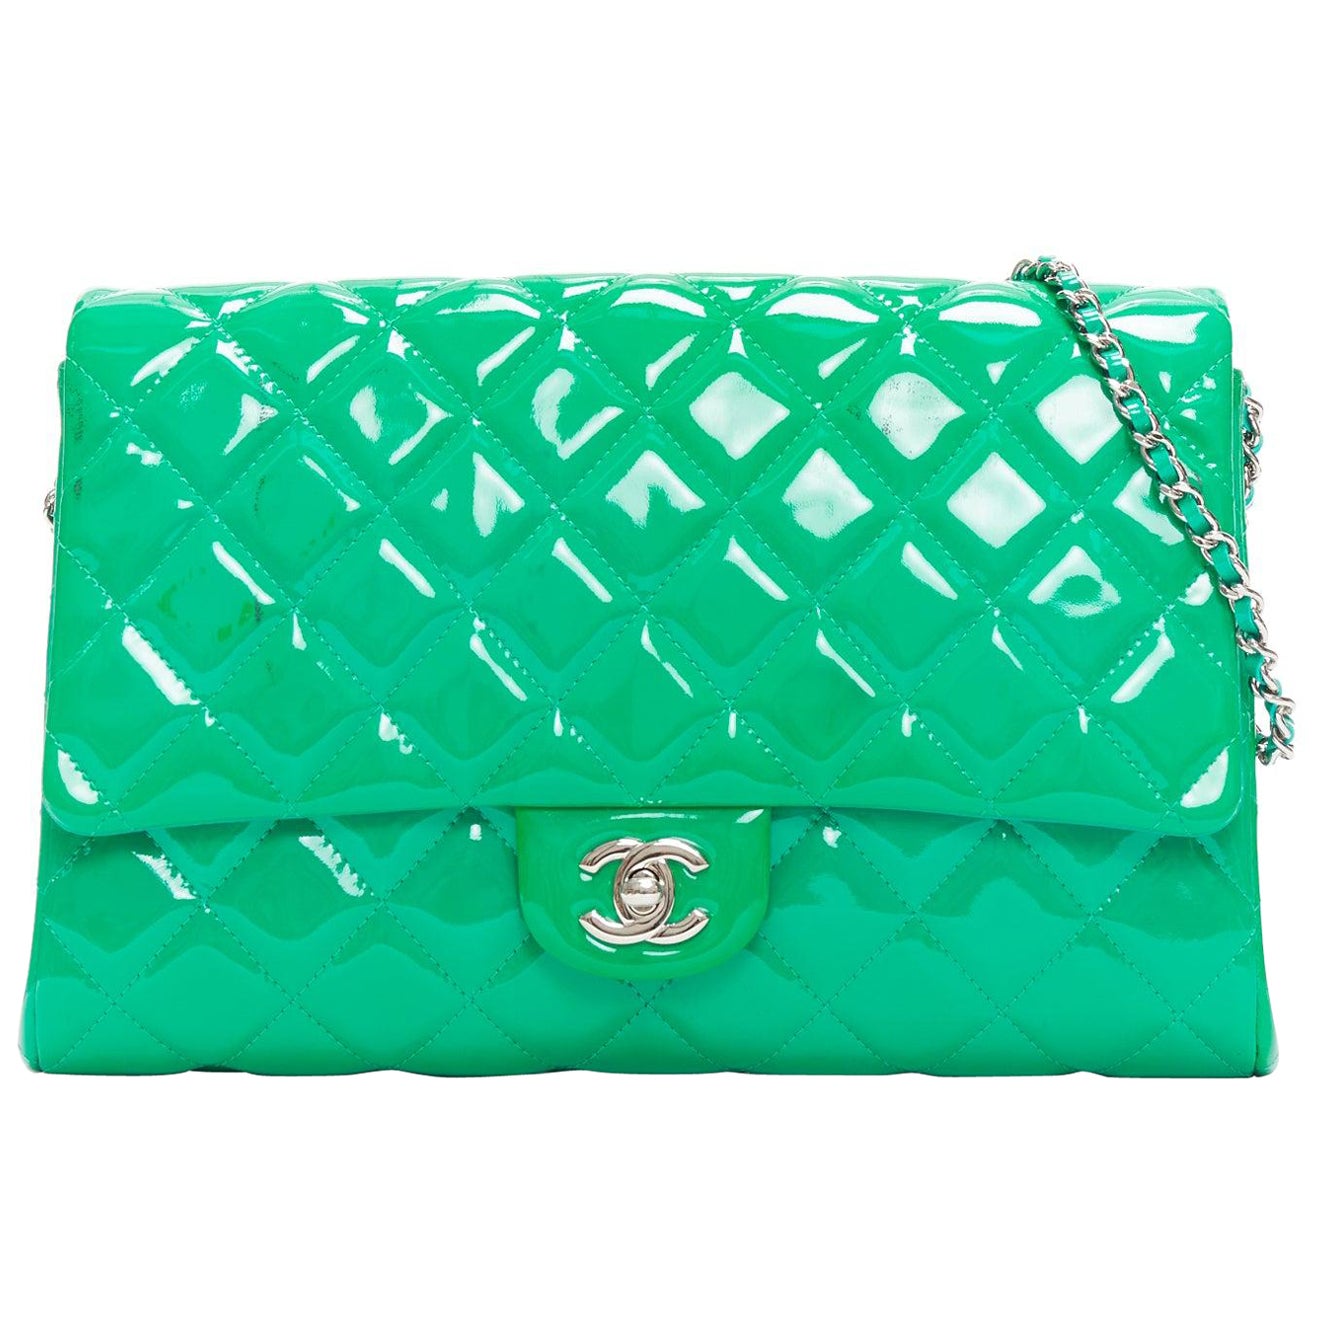 CHANEL green patent leather silver CC logo turnlock flap shoulder bag For Sale